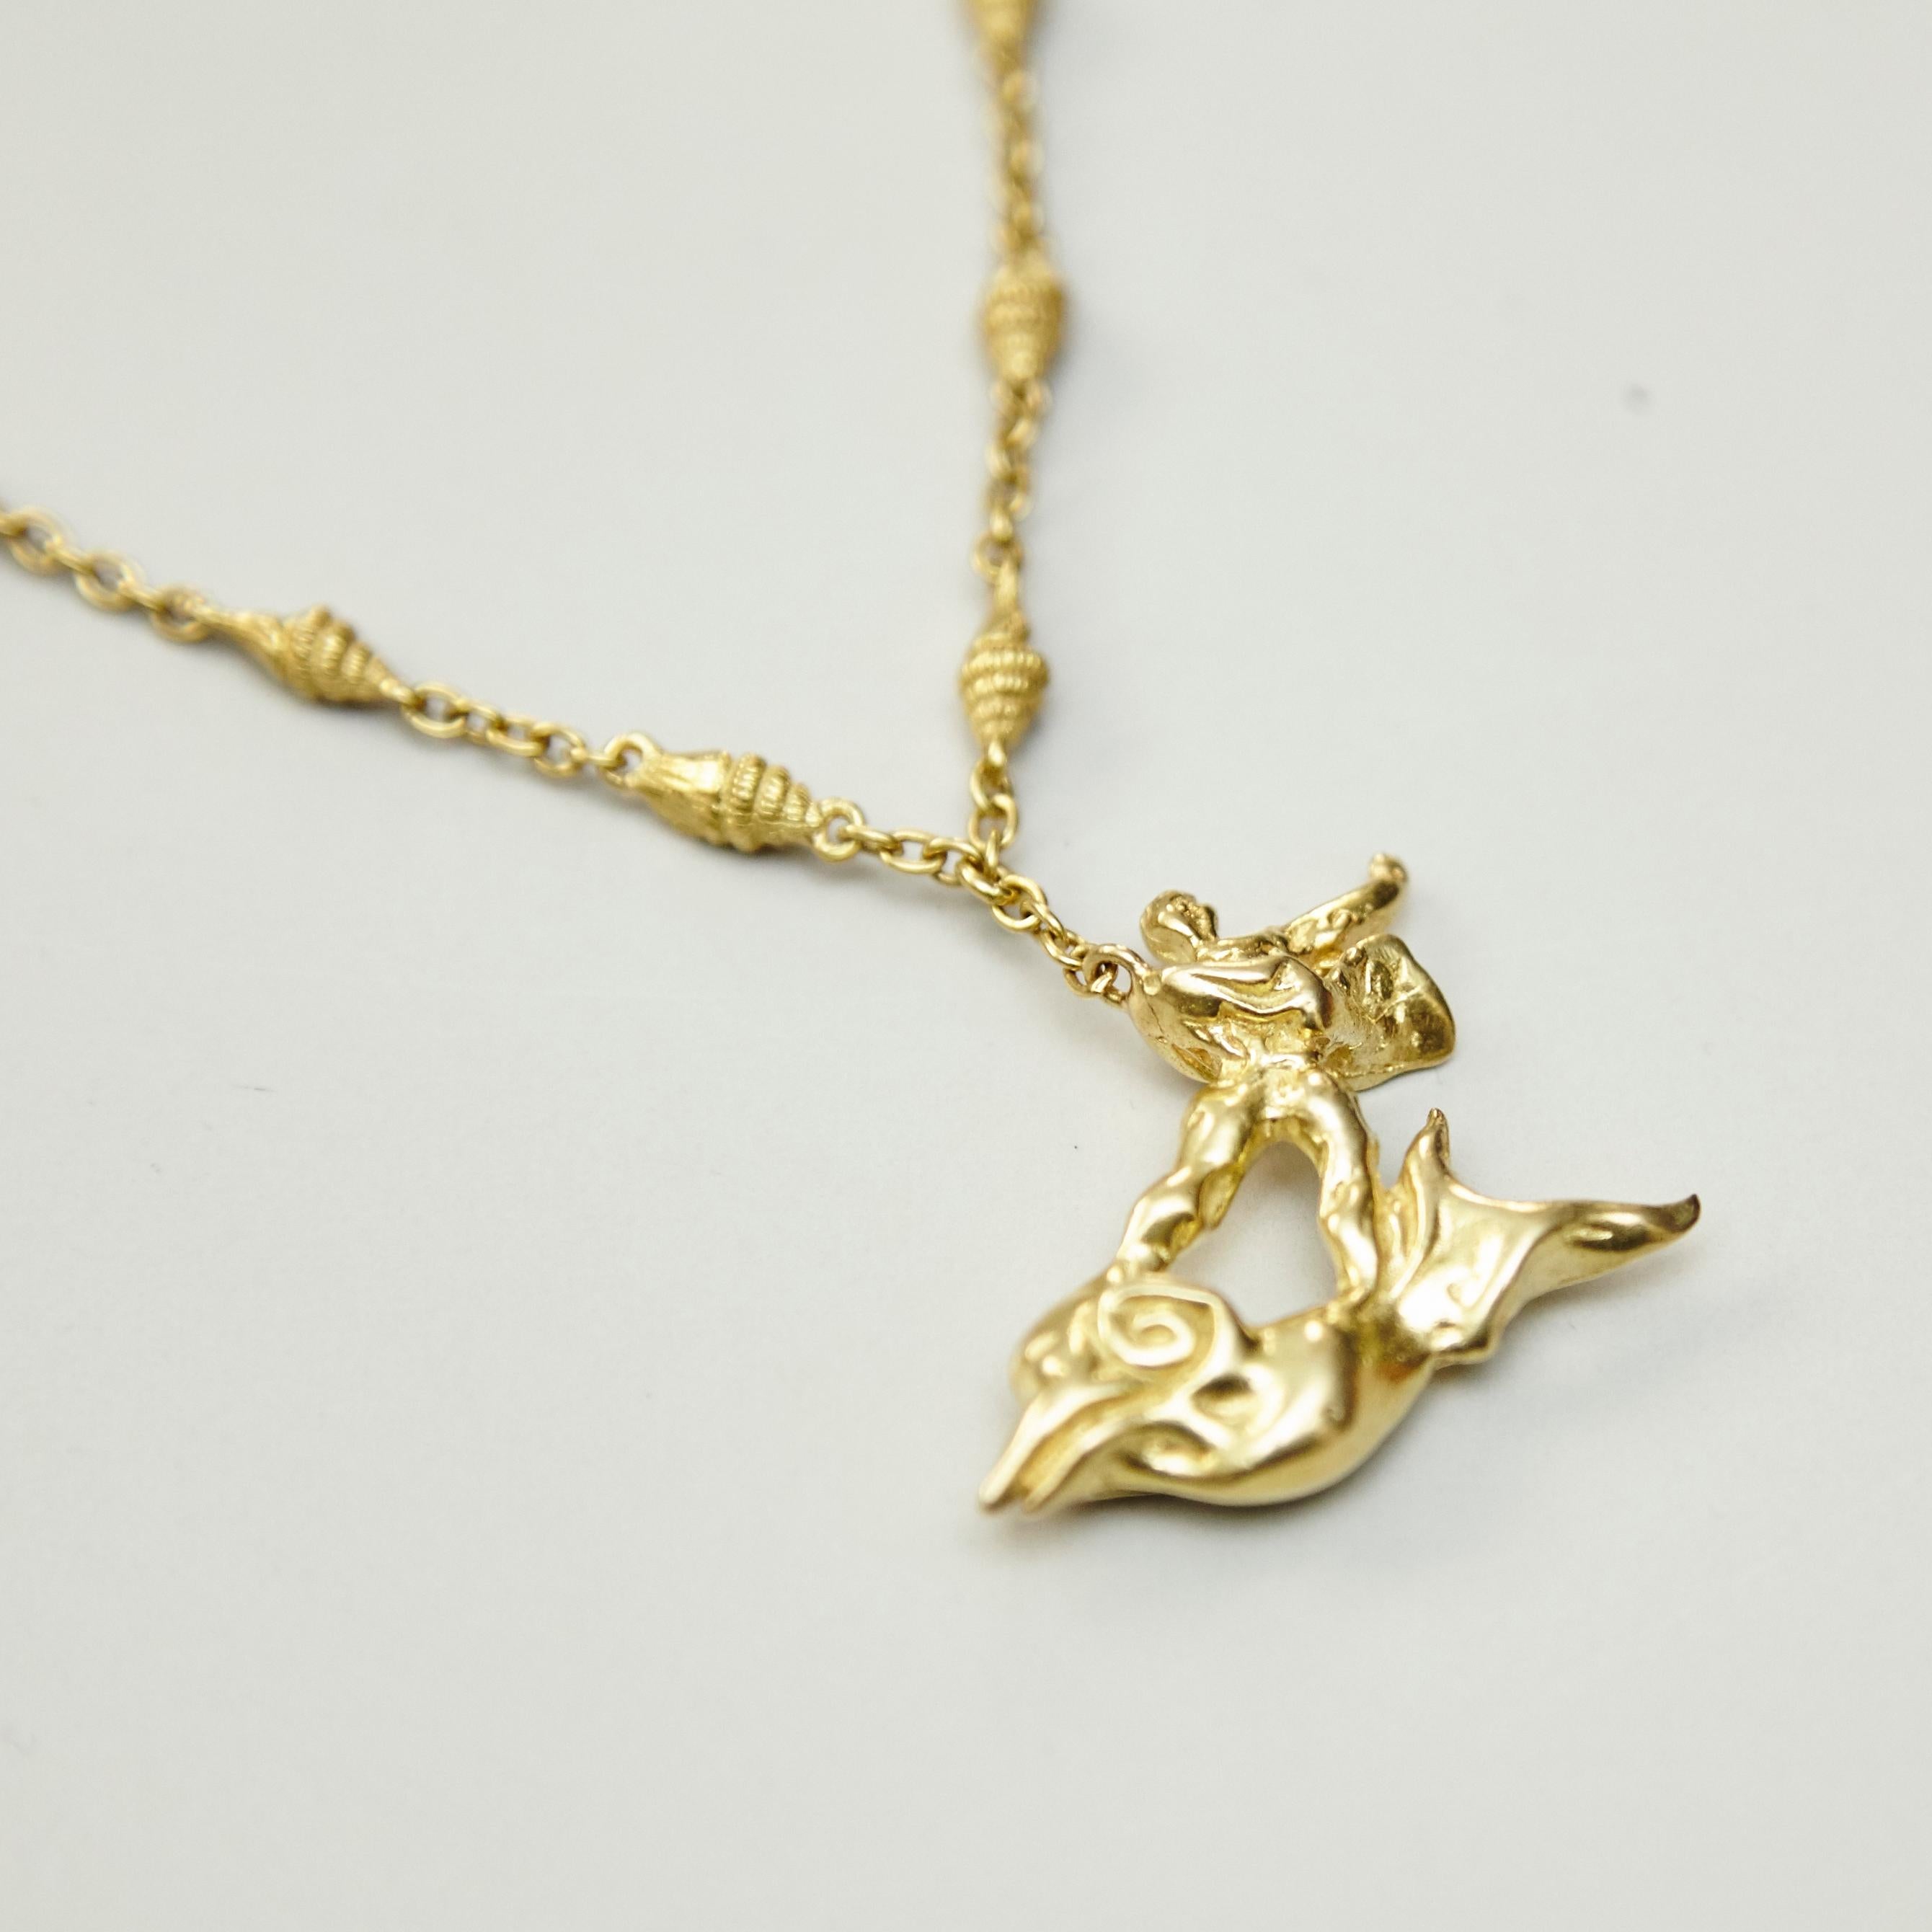 Limited Edition Dalí Gold Necklace and Bracelet 'The Man and the Dolphin' 7